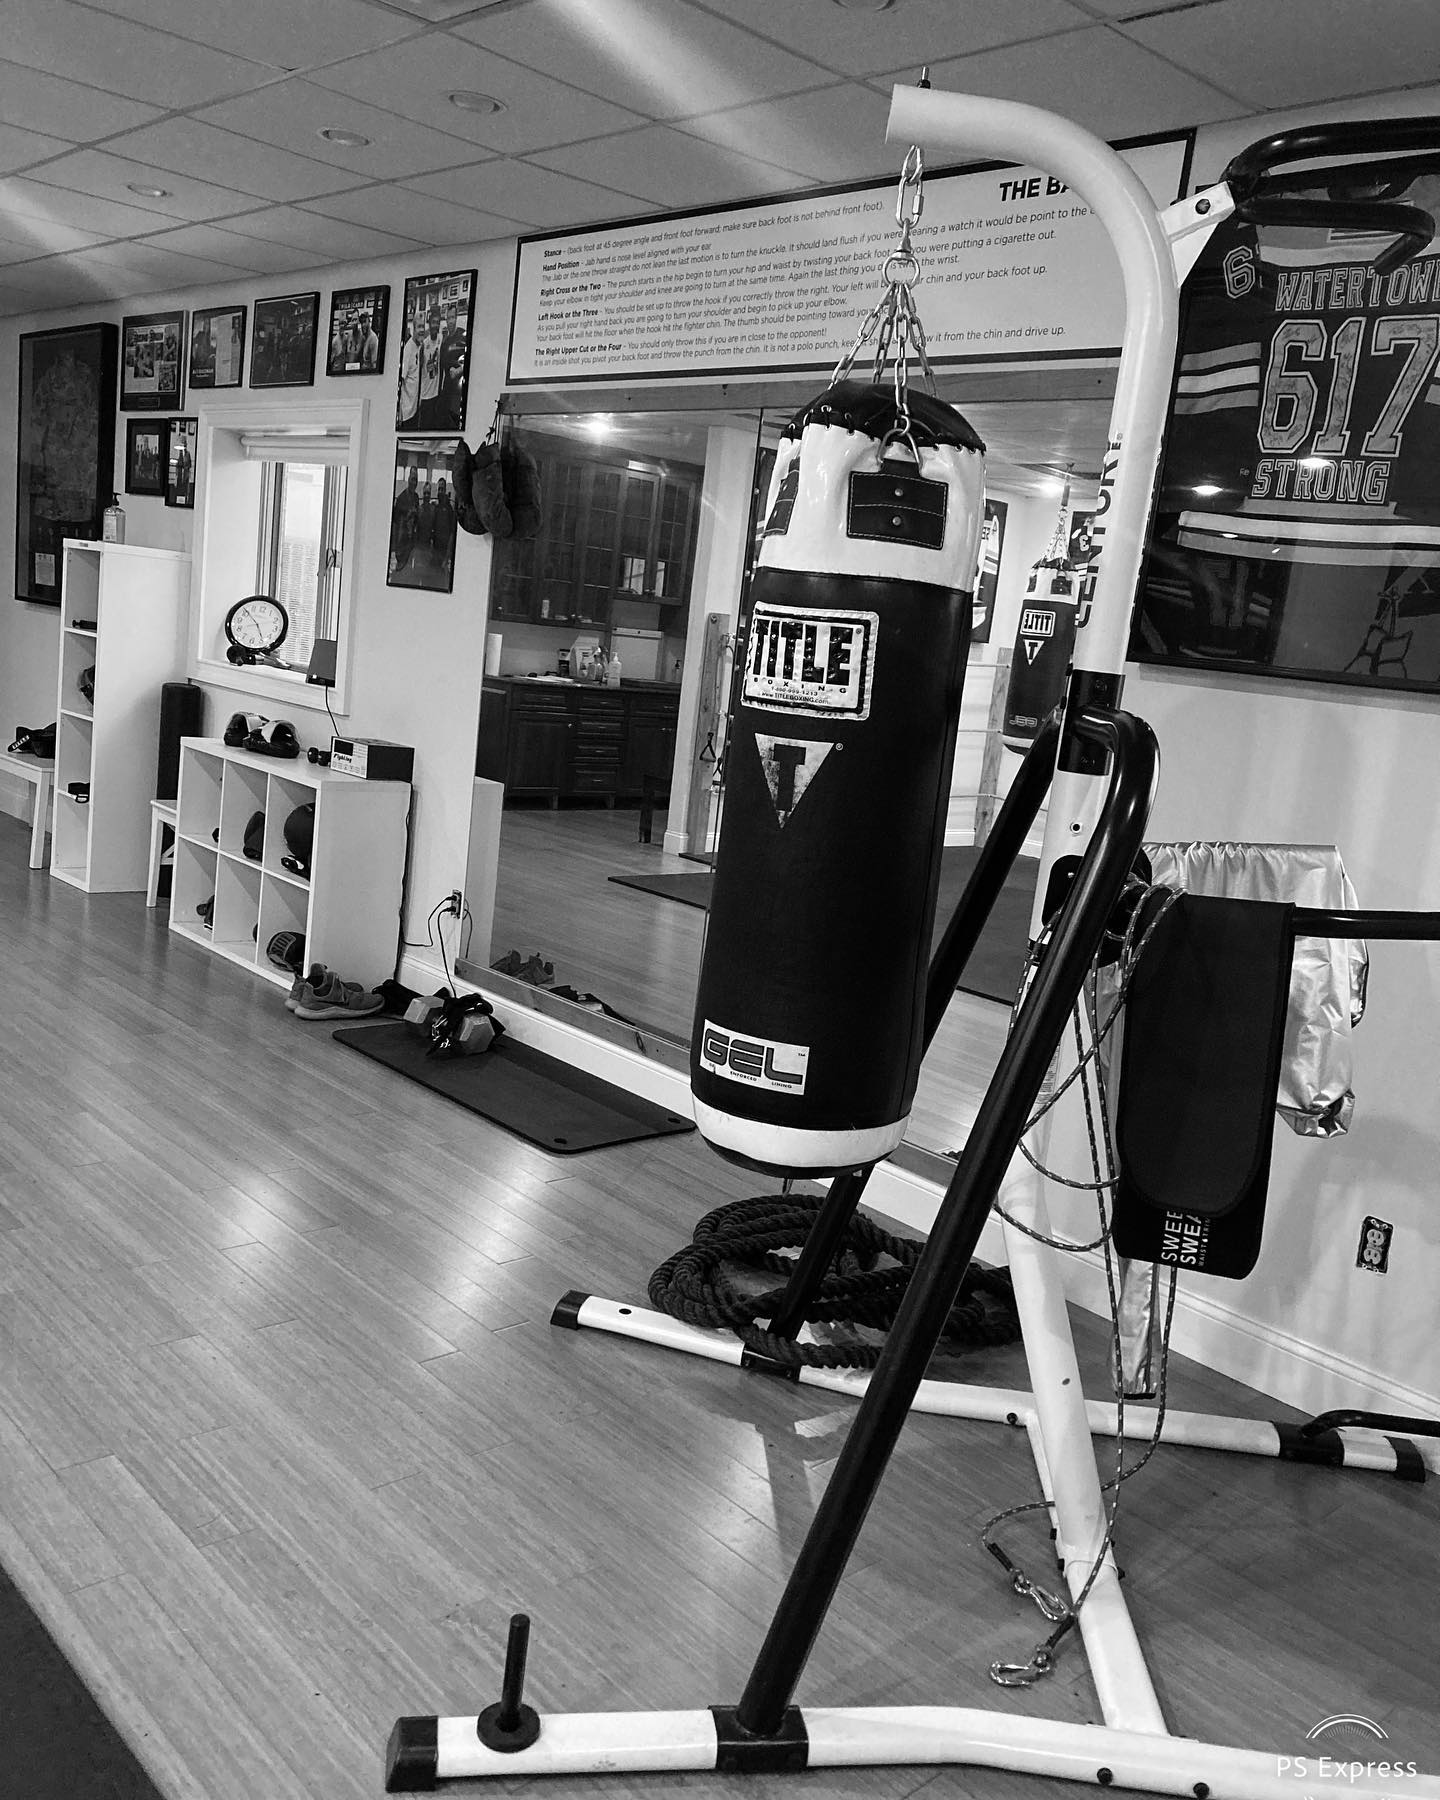 At FitBOX The boxing workout is great for fat loss. Almost every boxing exercise will make you sweat. You can lose 2-4 pounds in a single workout if it’s intense enough. 
@tommymcinerney